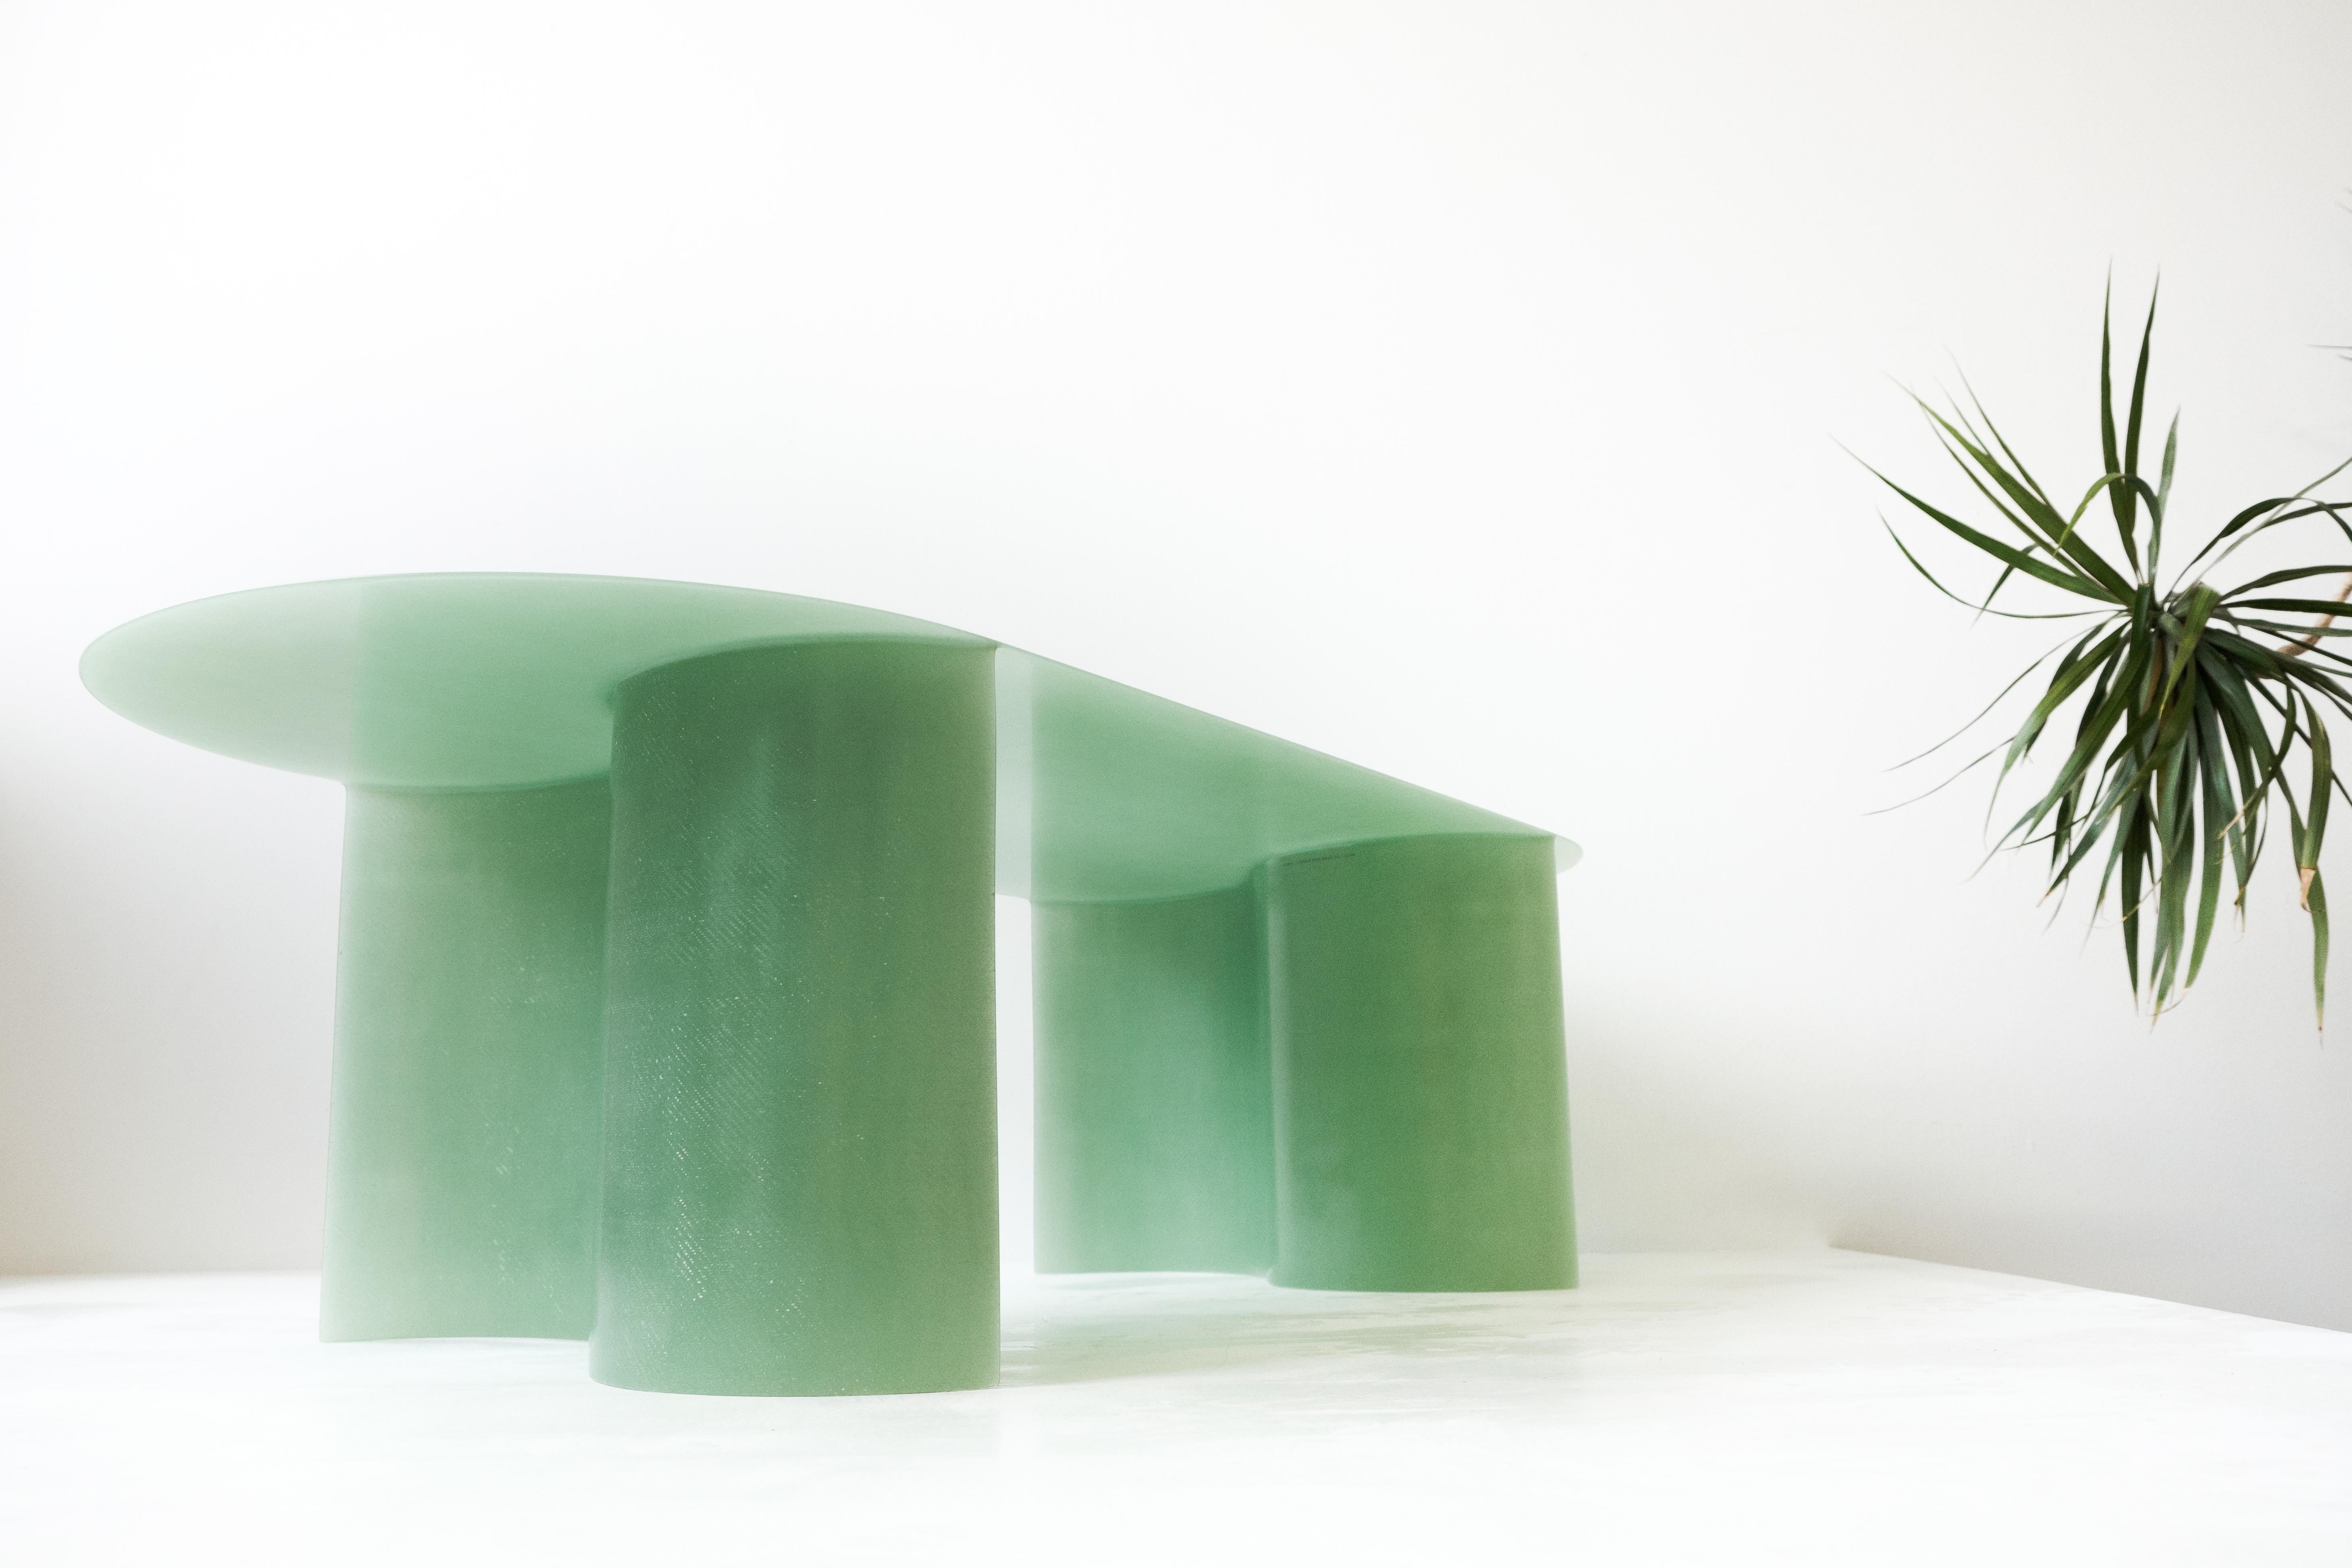 Resin Contemporary Green Fiberglass, New Wave Coffee Table Big, by Lukas Cober